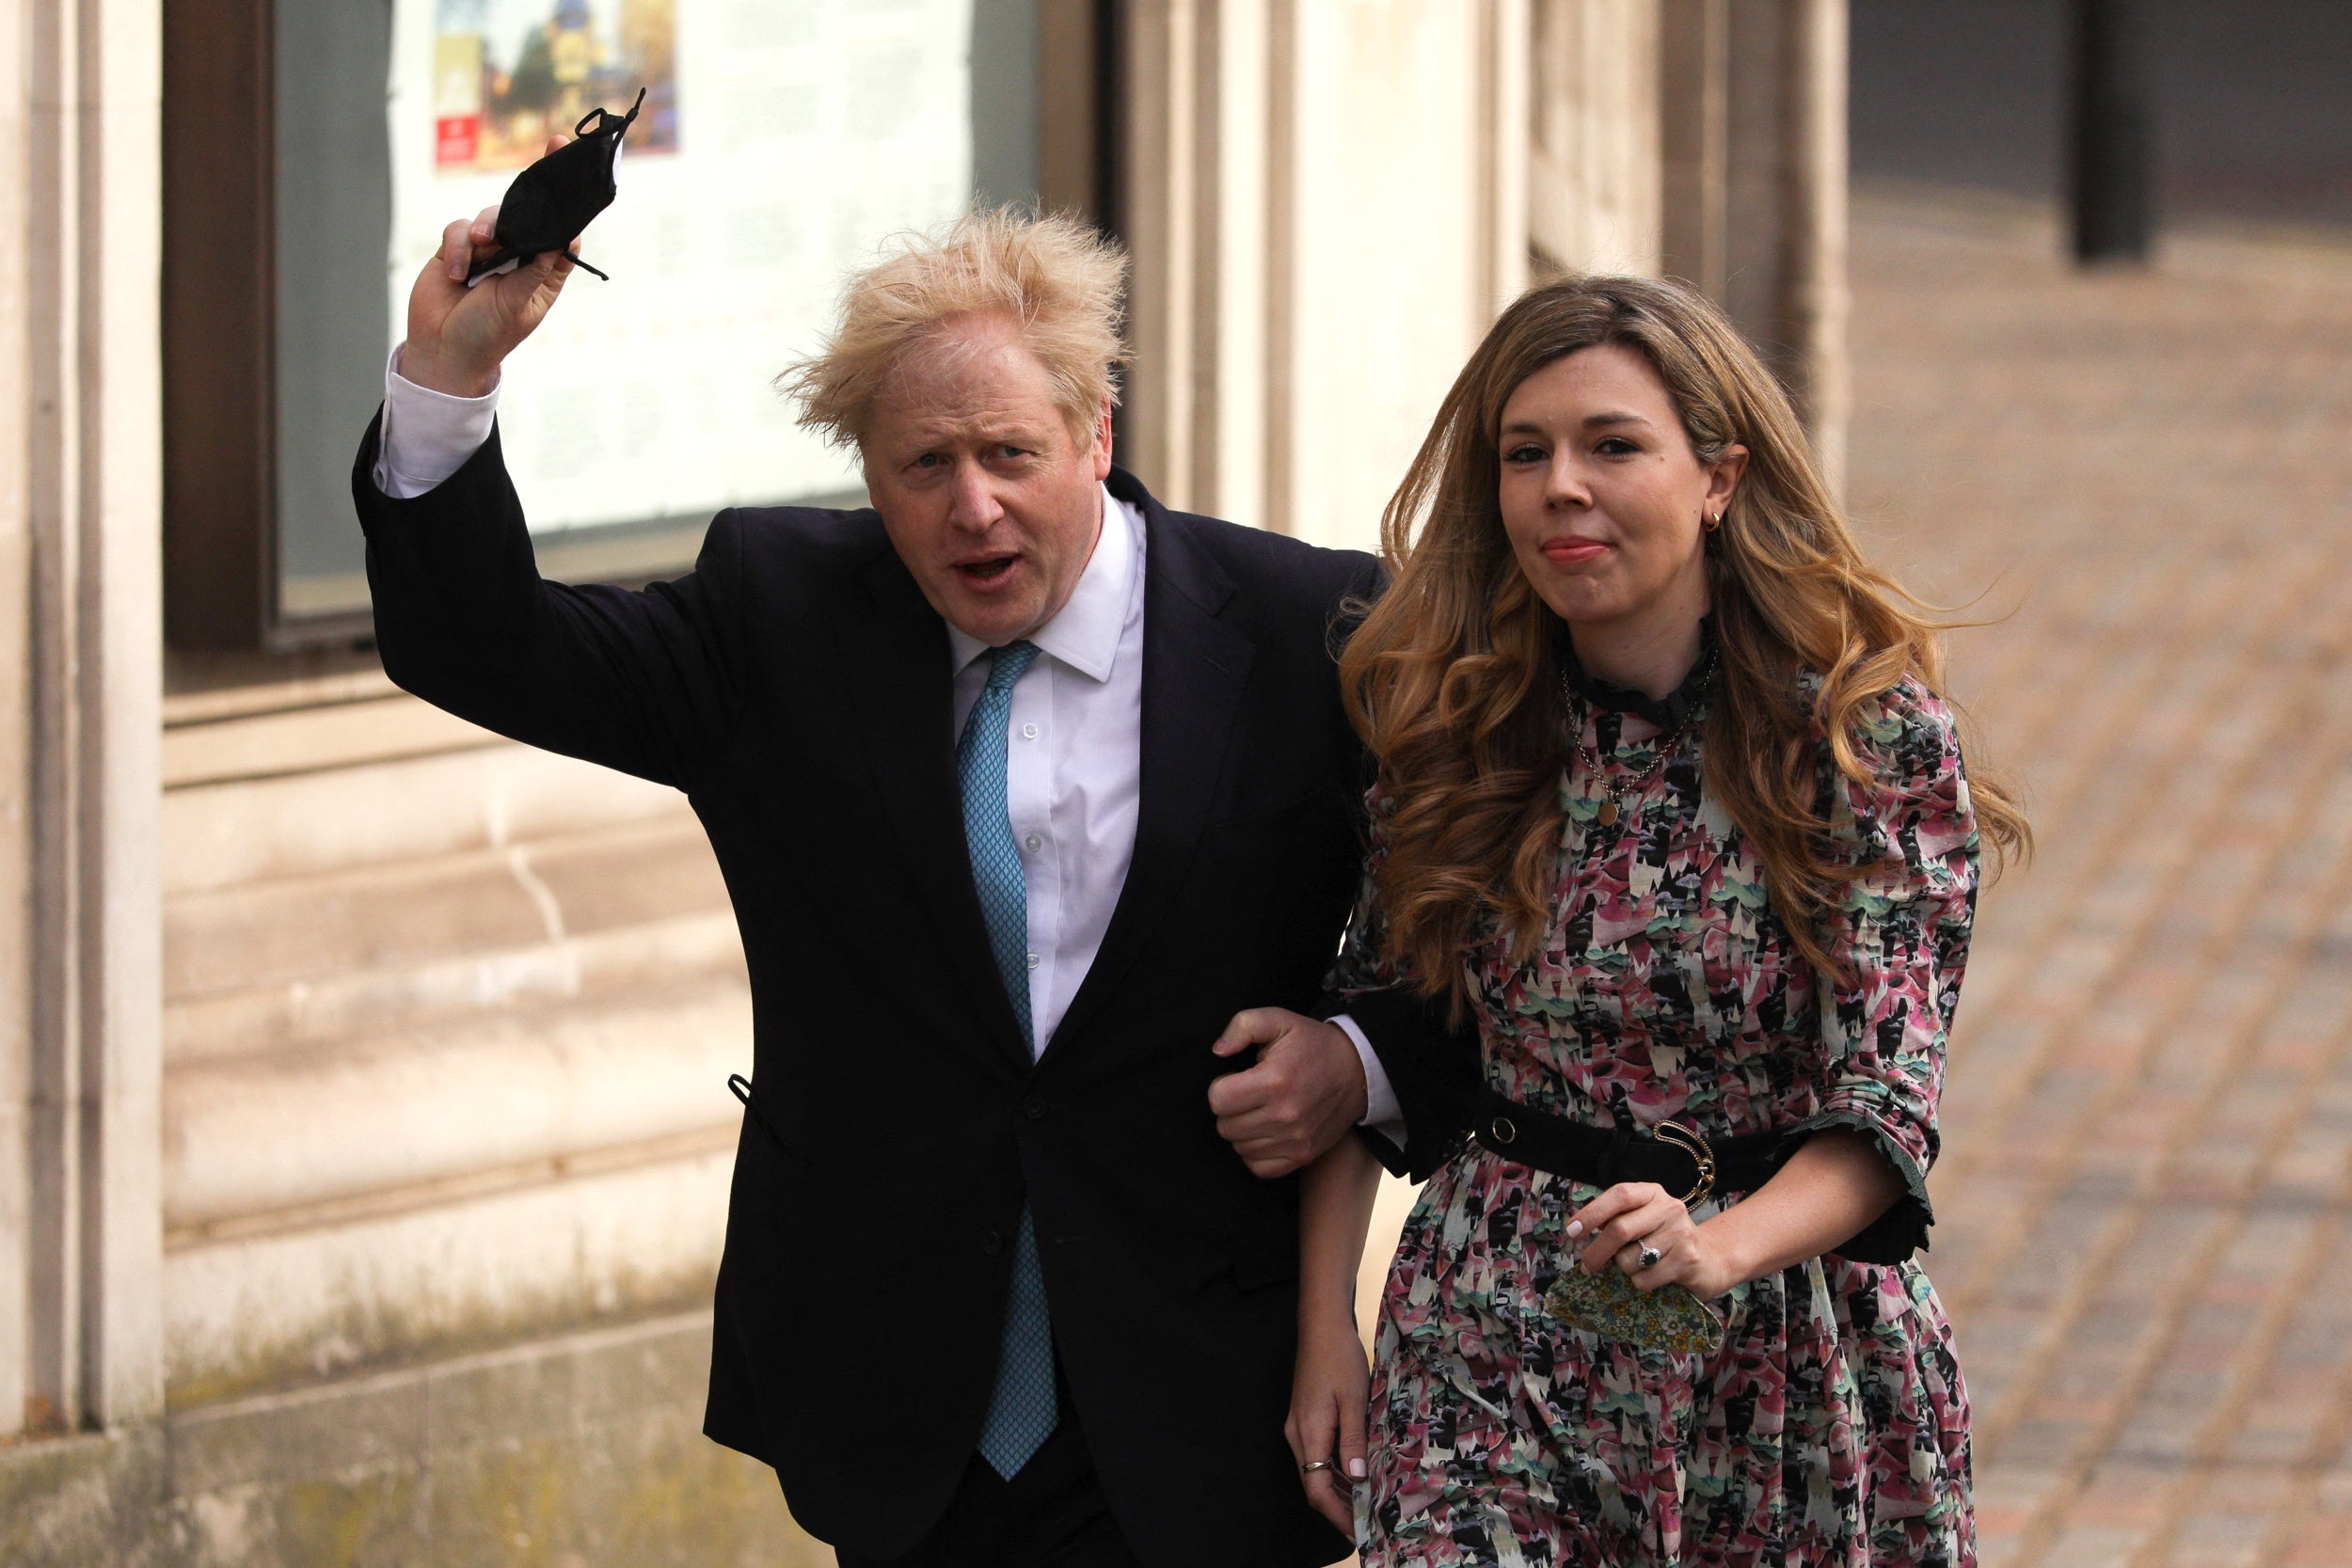 Britain’s Prime Minister Boris Johnson and partner Carrie Symonds arrive at Methodist Hall in central London to cast their votes in local elections on 6 May, 2021. The PM and Ms Symonds have reportedly tied the knot in a pared-back ceremony.